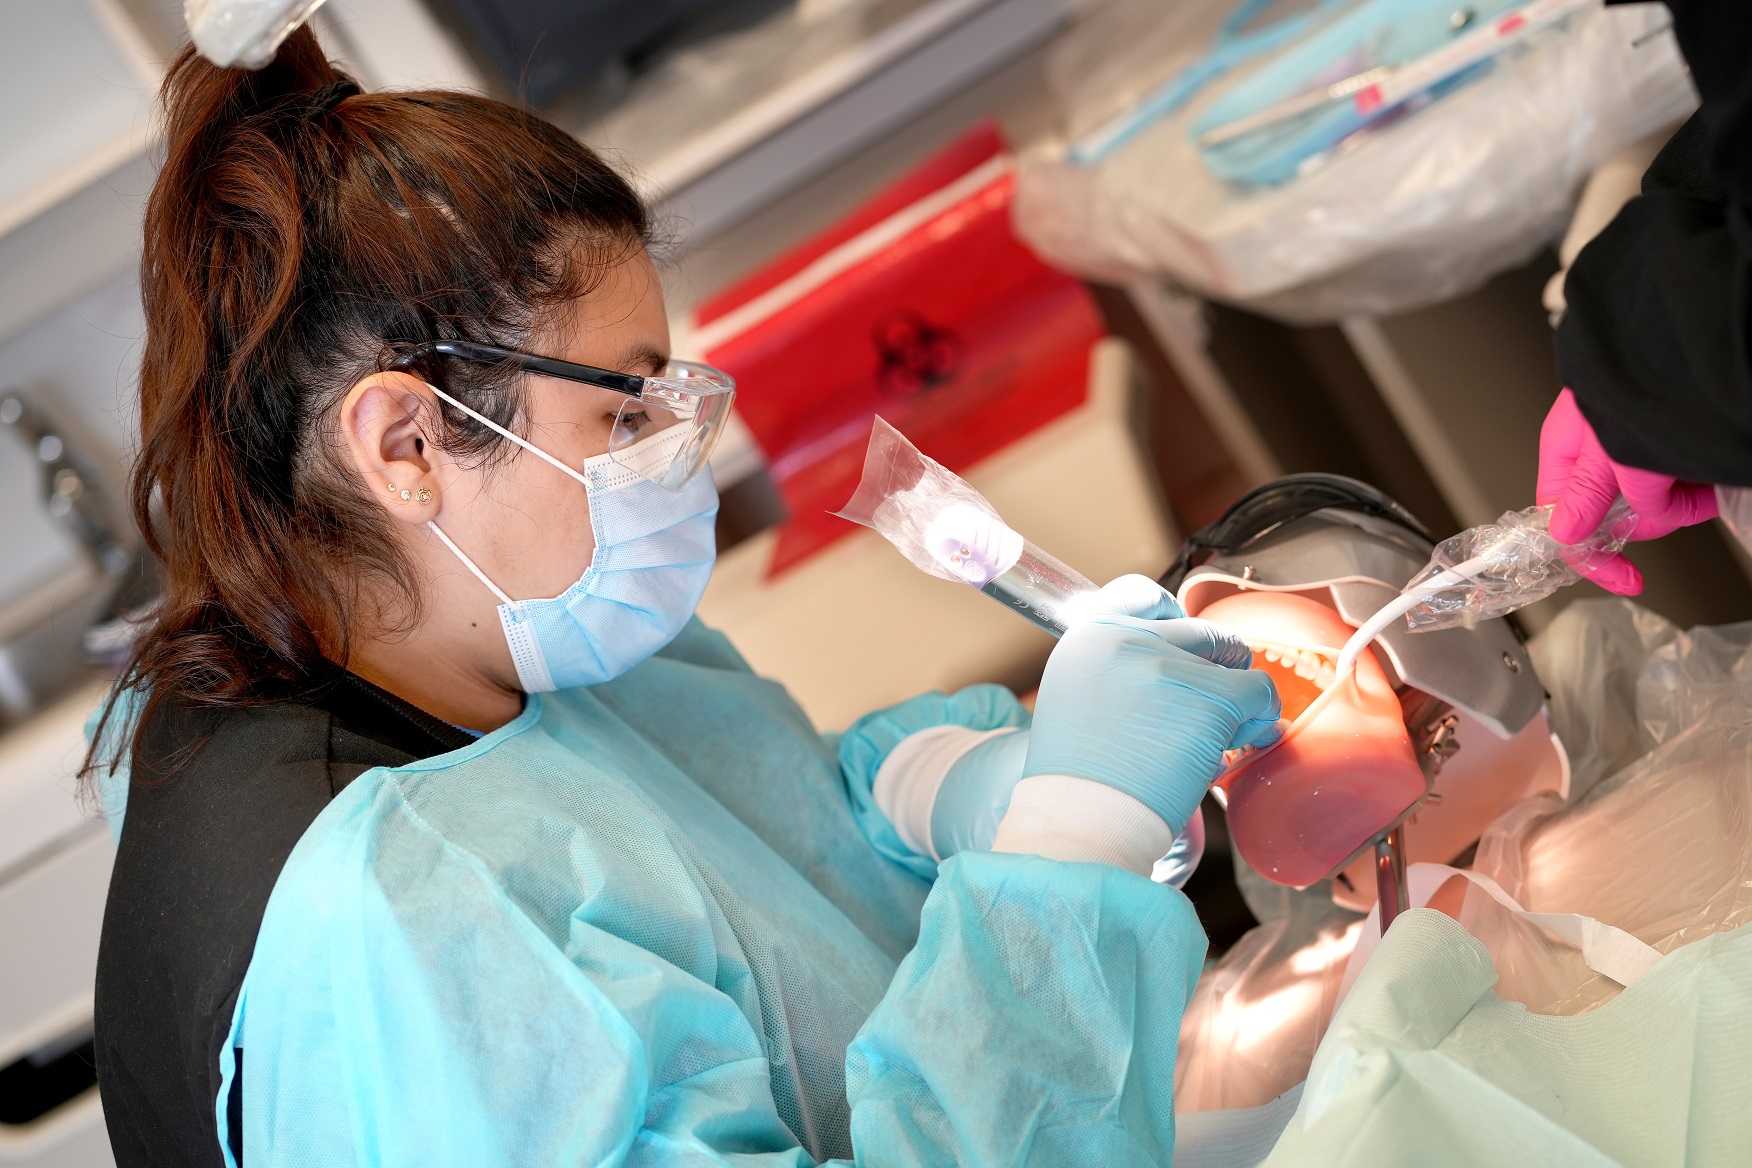 A dental student inspecting a fake set of teeth.